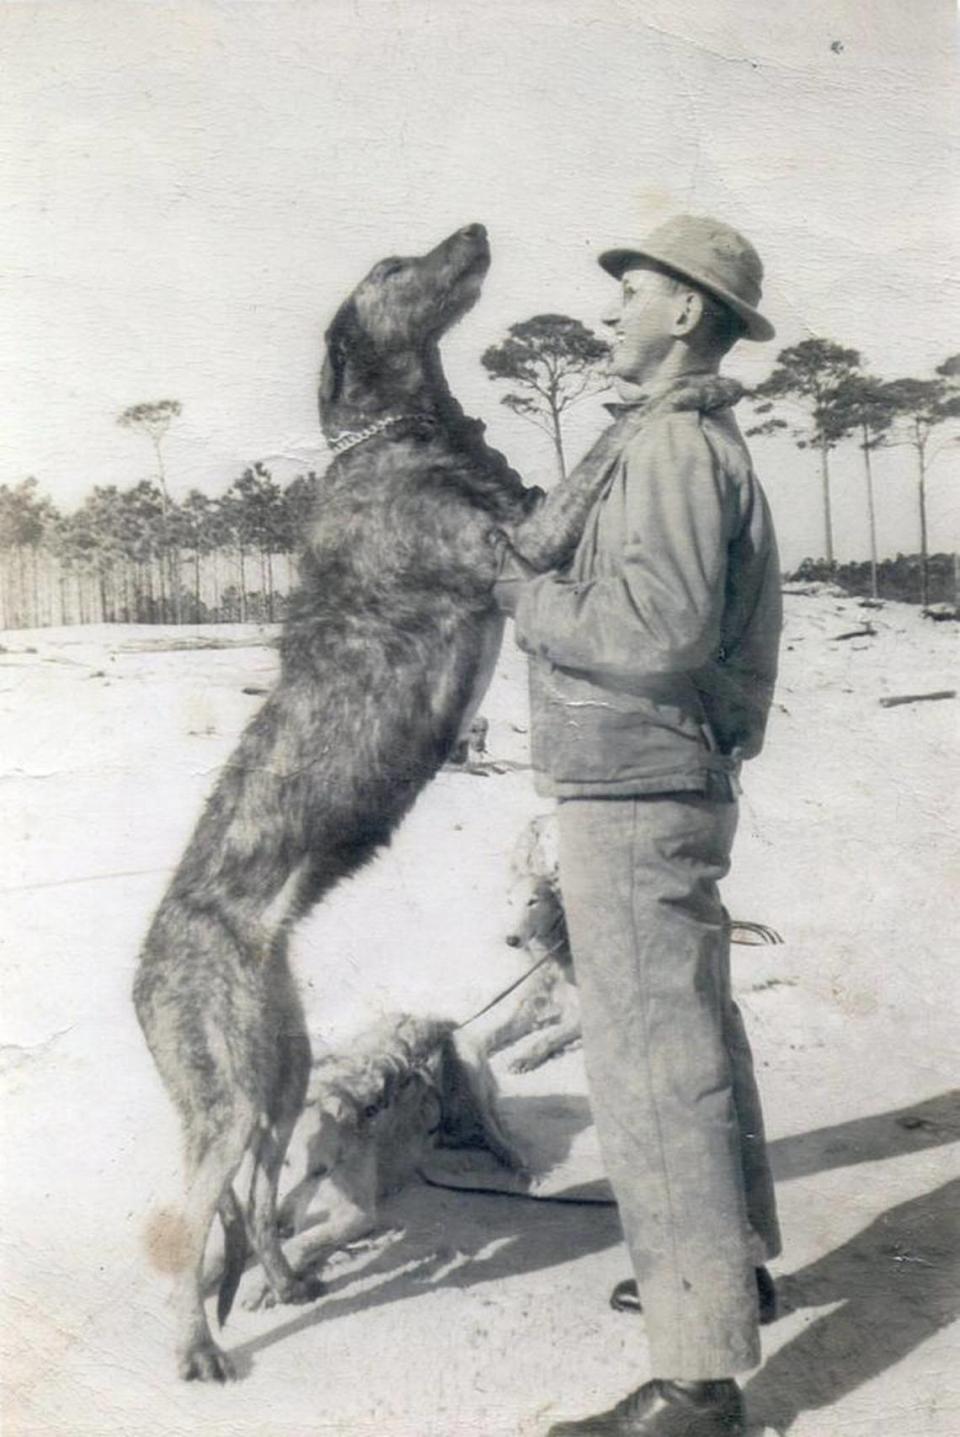 Arthur Lang works with a pack of Irish and Russian wolfhounds at a secret dog-training facility at Cat Island operated by the Army in World War II.